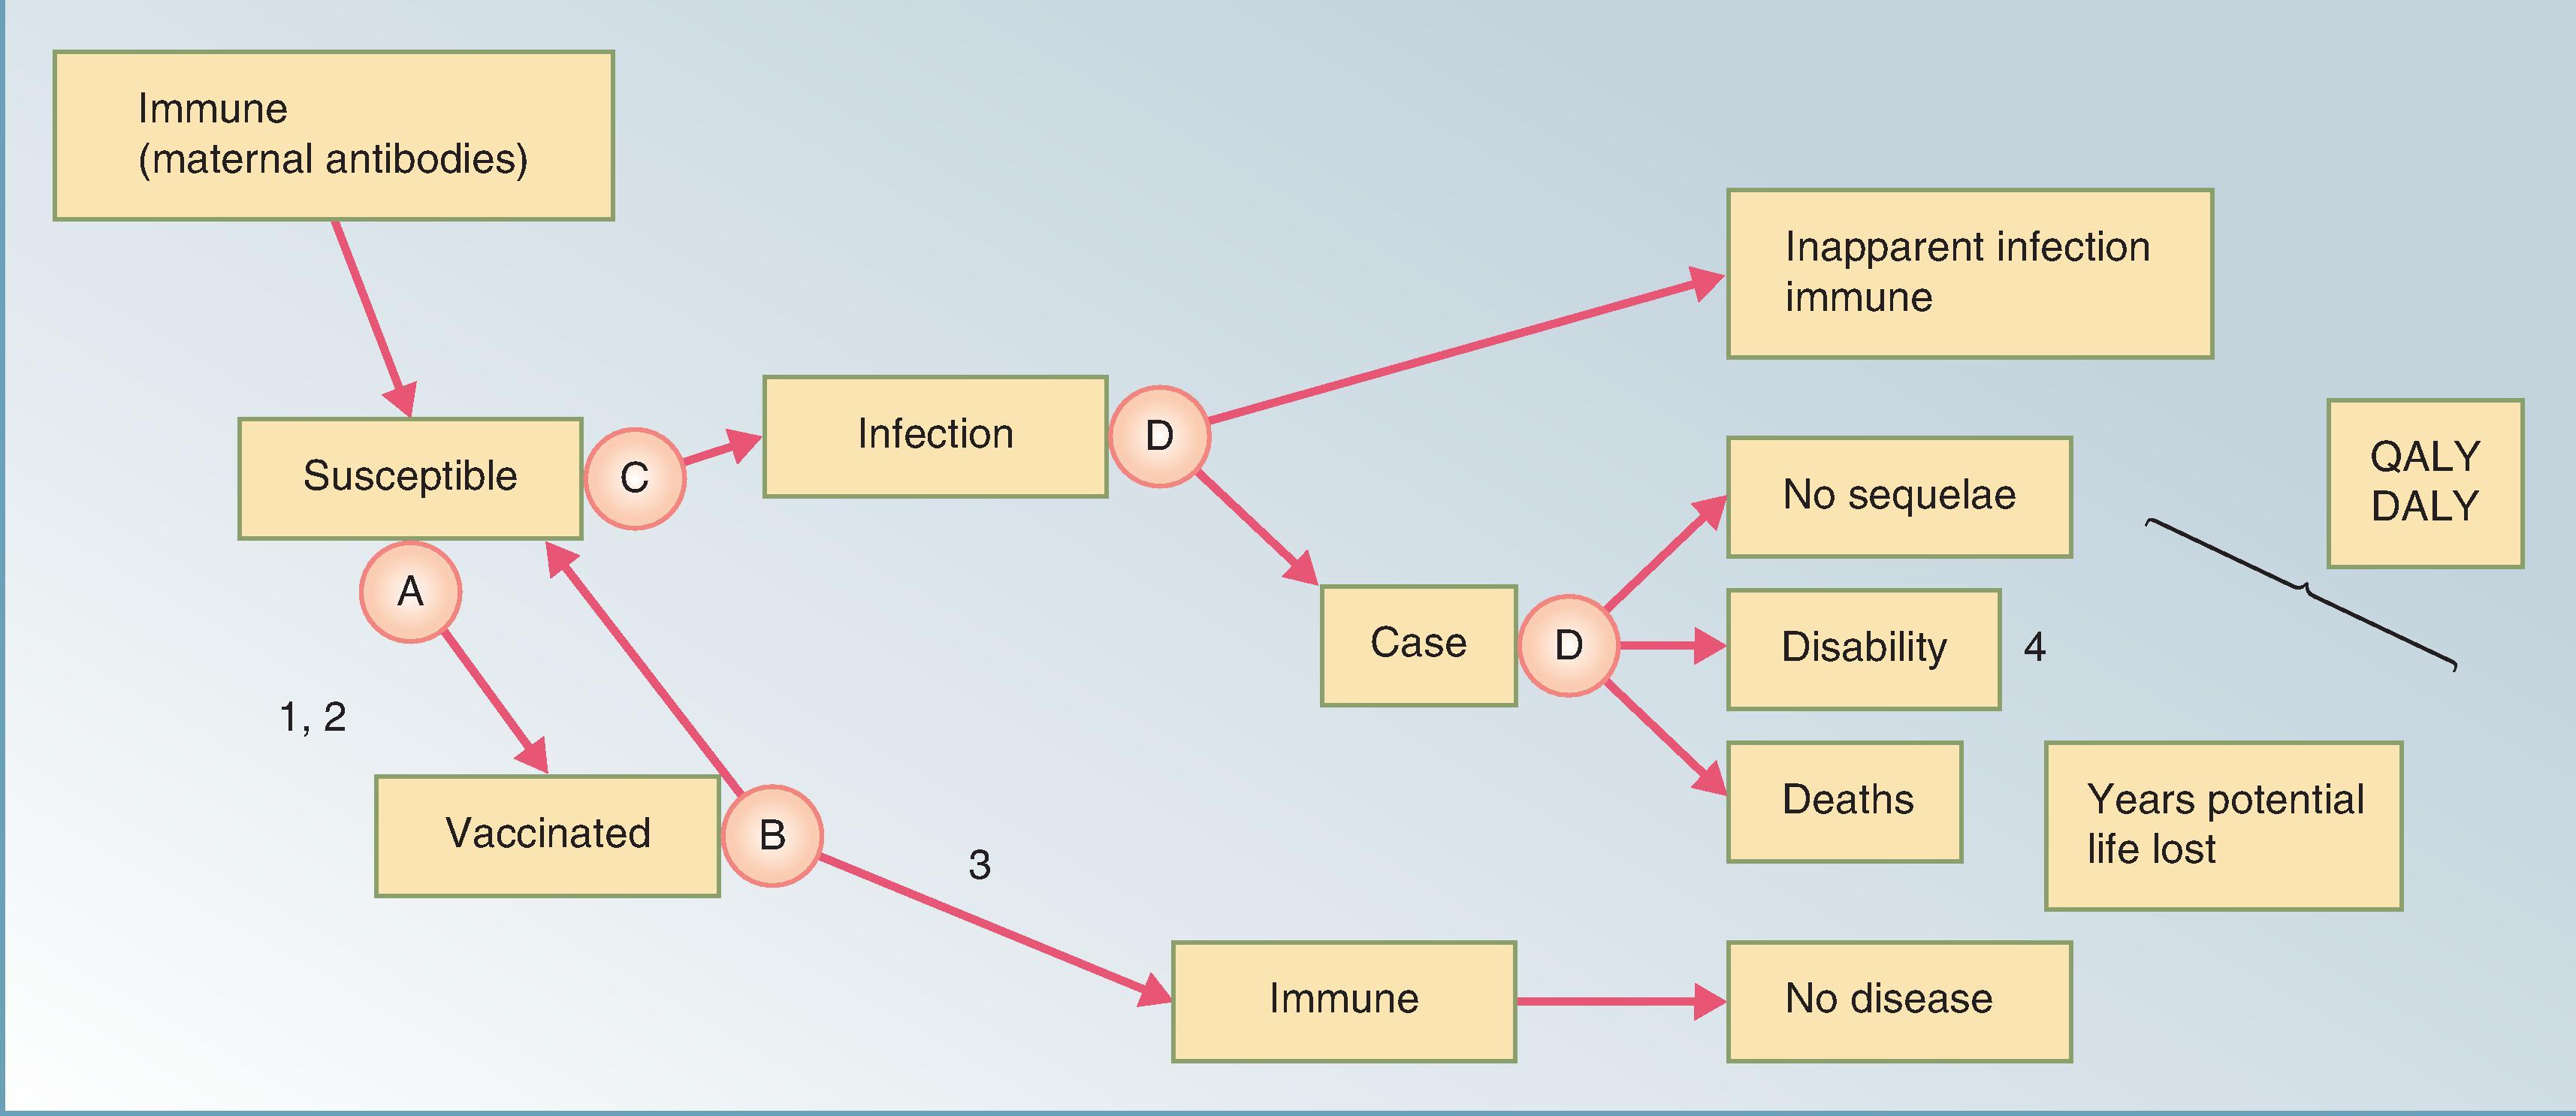 Fig. 79.1, Simplified schematic of compartmental model of infectious disease transmission with a vaccine-preventable strategy. Each of the boxes represents a particular immunologic state of a vaccine-preventable disease. Assuming all persons are susceptible to infection after birth (following maternal antibody protection), there are variable probabilities for passage into another immunological state throughout the person’s lifetime. These probabilities can be quantified to model the impact of a vaccination program on a birth cohort followed throughout life to quantify disease burden. (A) Vaccination coverage rate (age specific and by dose). (B) Vaccine efficacy by dose (effectiveness more relevant to account for herd effect). (C) Age-specific force of infection. (D) Probabilities of progression to each outcome state. (1) A screening program could be added here to help target vaccination efforts. (2) Adverse event probabilities could be added here. (3) Dose and possibly time dependent. (4) Any number of mutually exclusive outcome states could be added here.